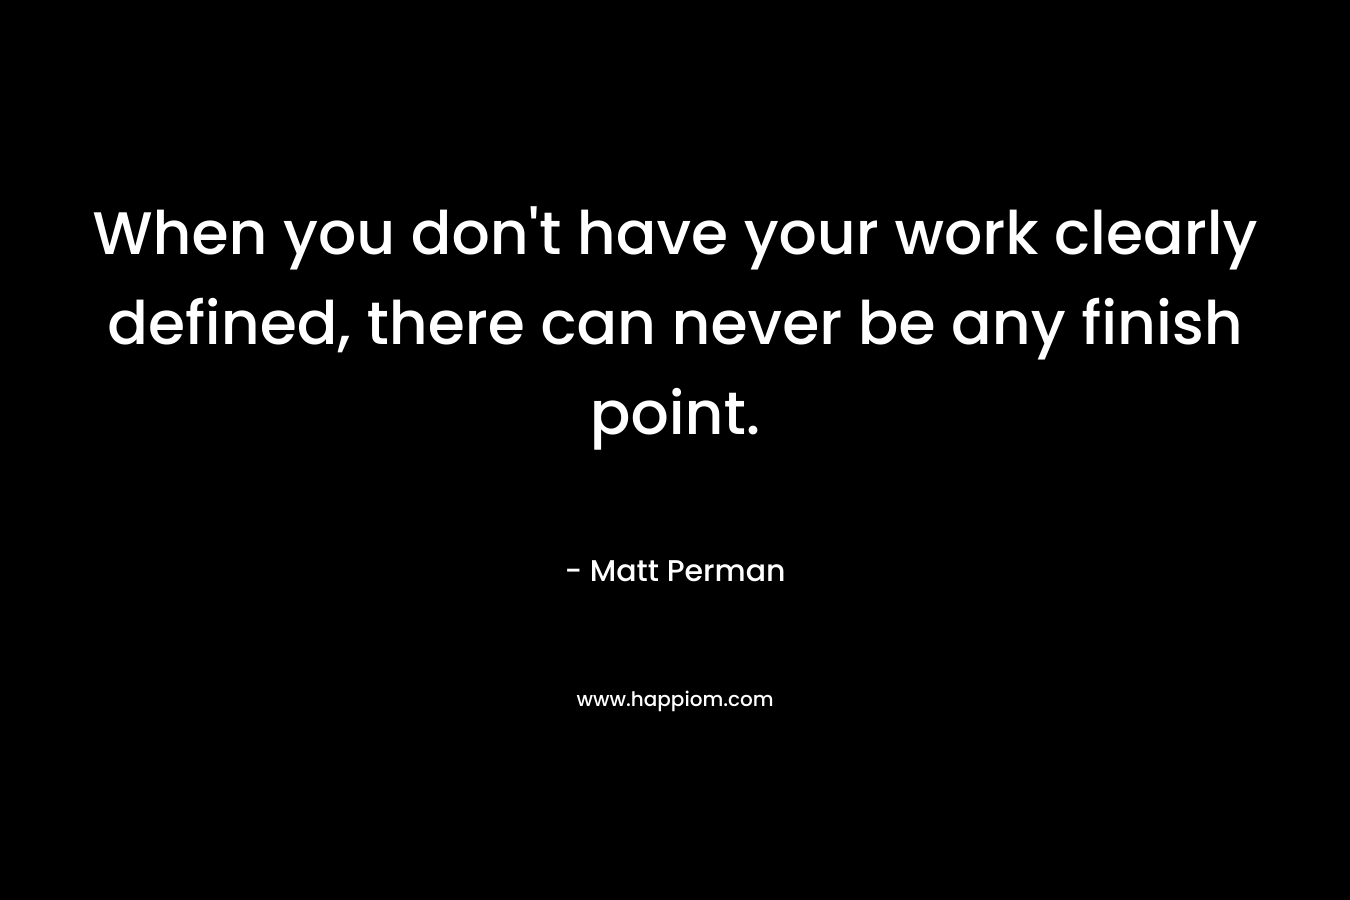 When you don’t have your work clearly defined, there can never be any finish point. – Matt Perman